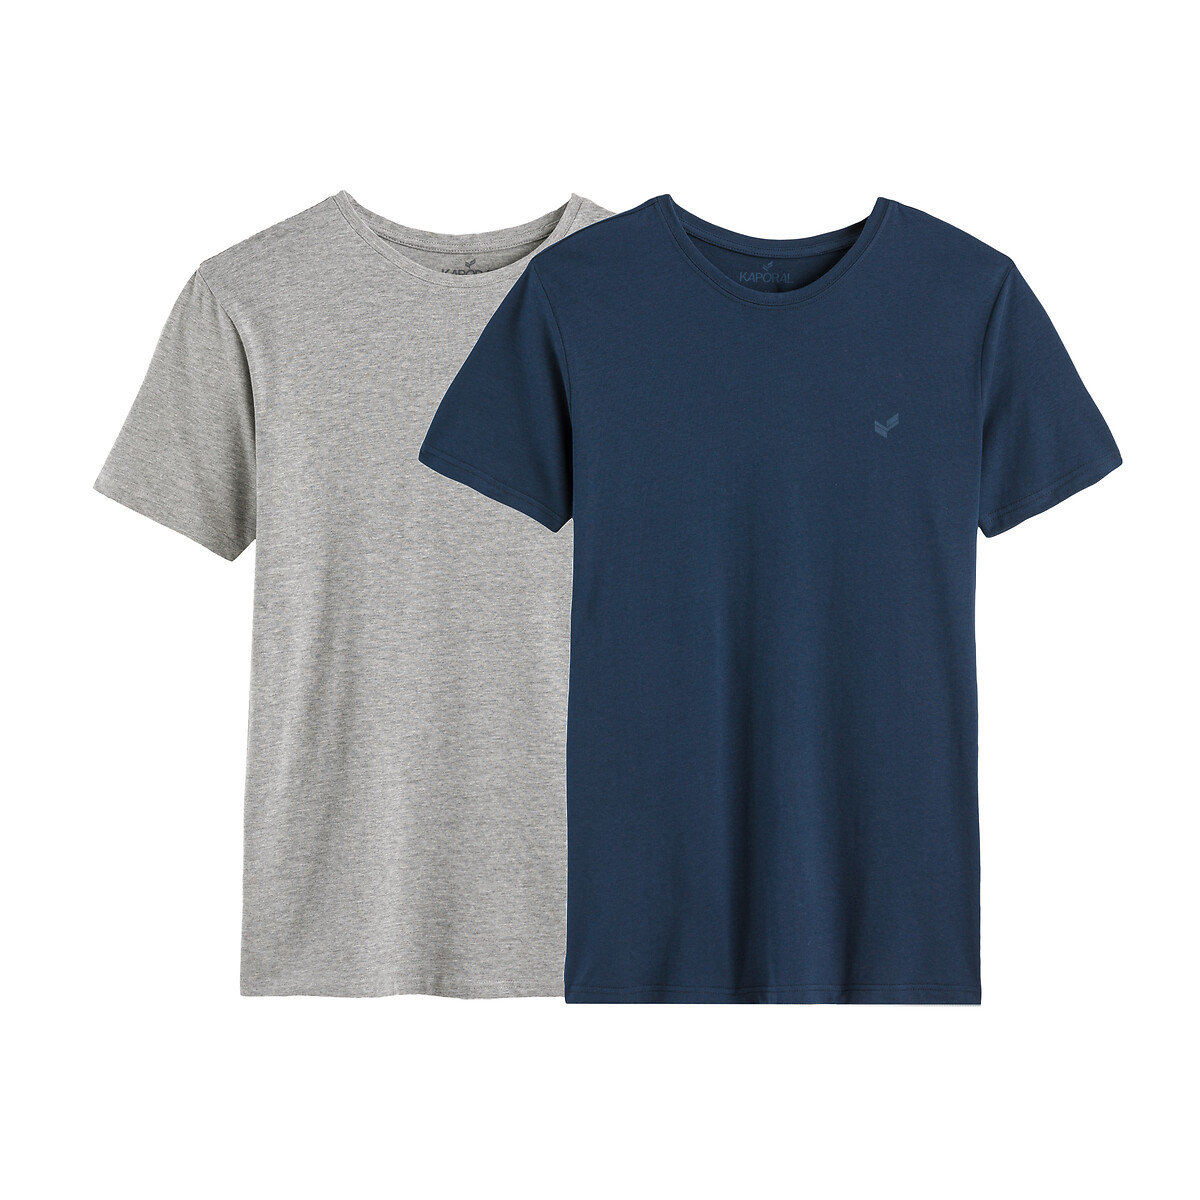 Pack of 2 Rift T-Shirts in Cotton with Crew Neck